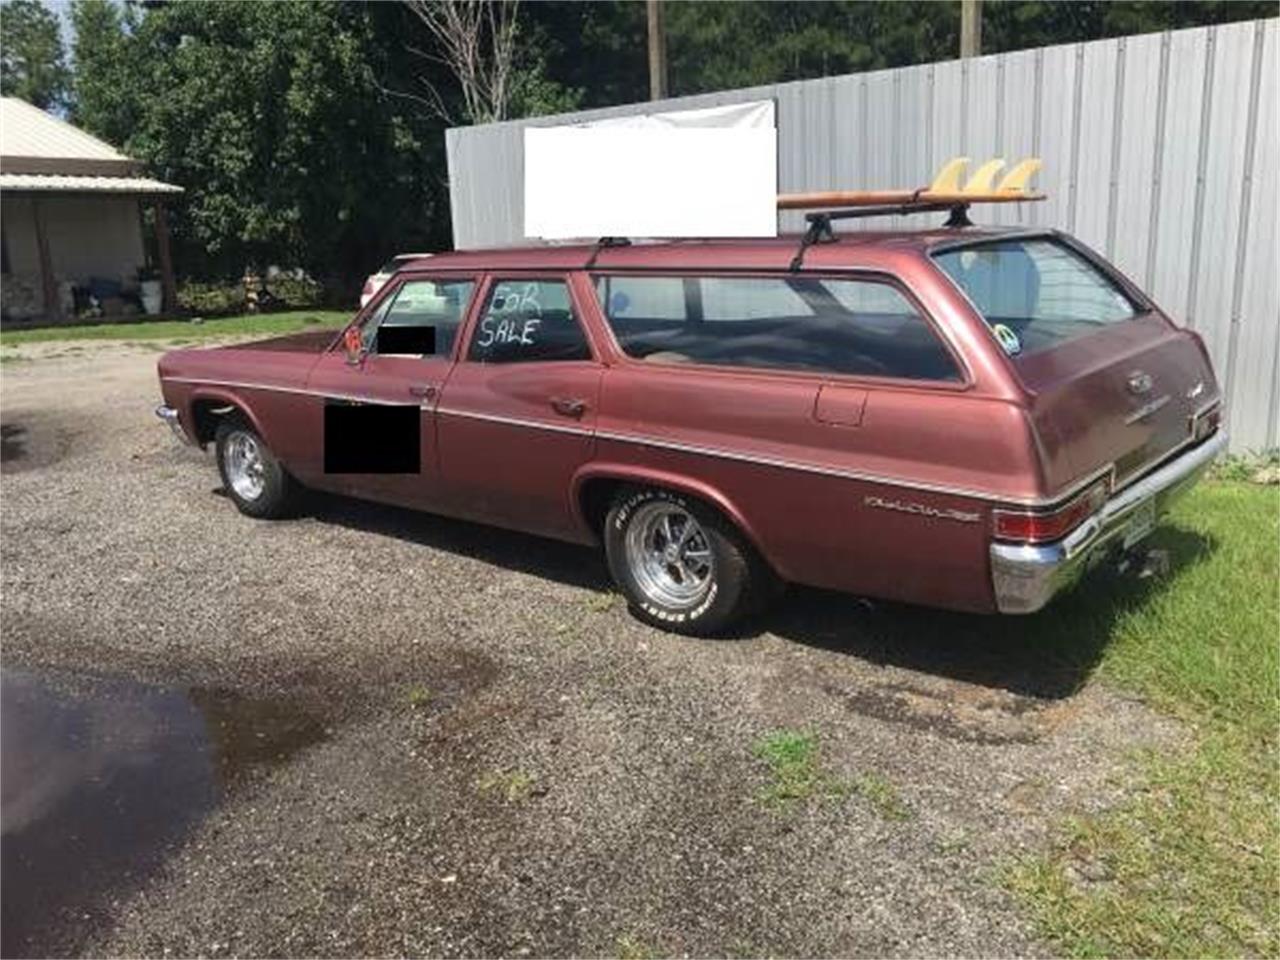 For Sale: 1966 Chevrolet Station Wagon in Cadillac, Michigan.